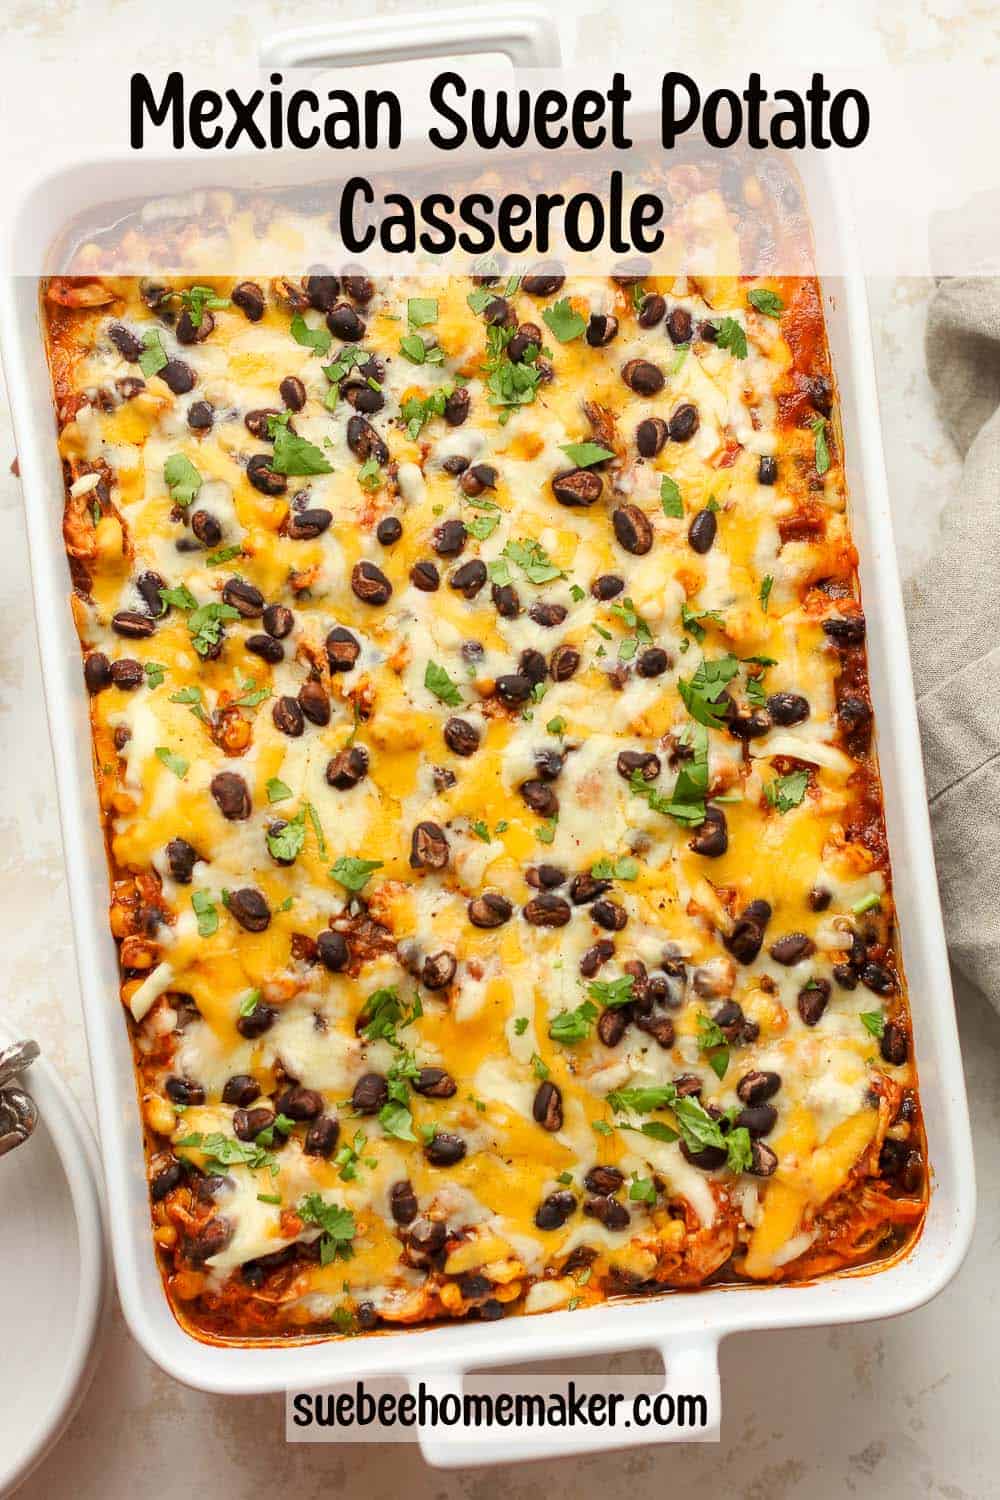 A large casserole of Mexican sweet potatoes and chicken.